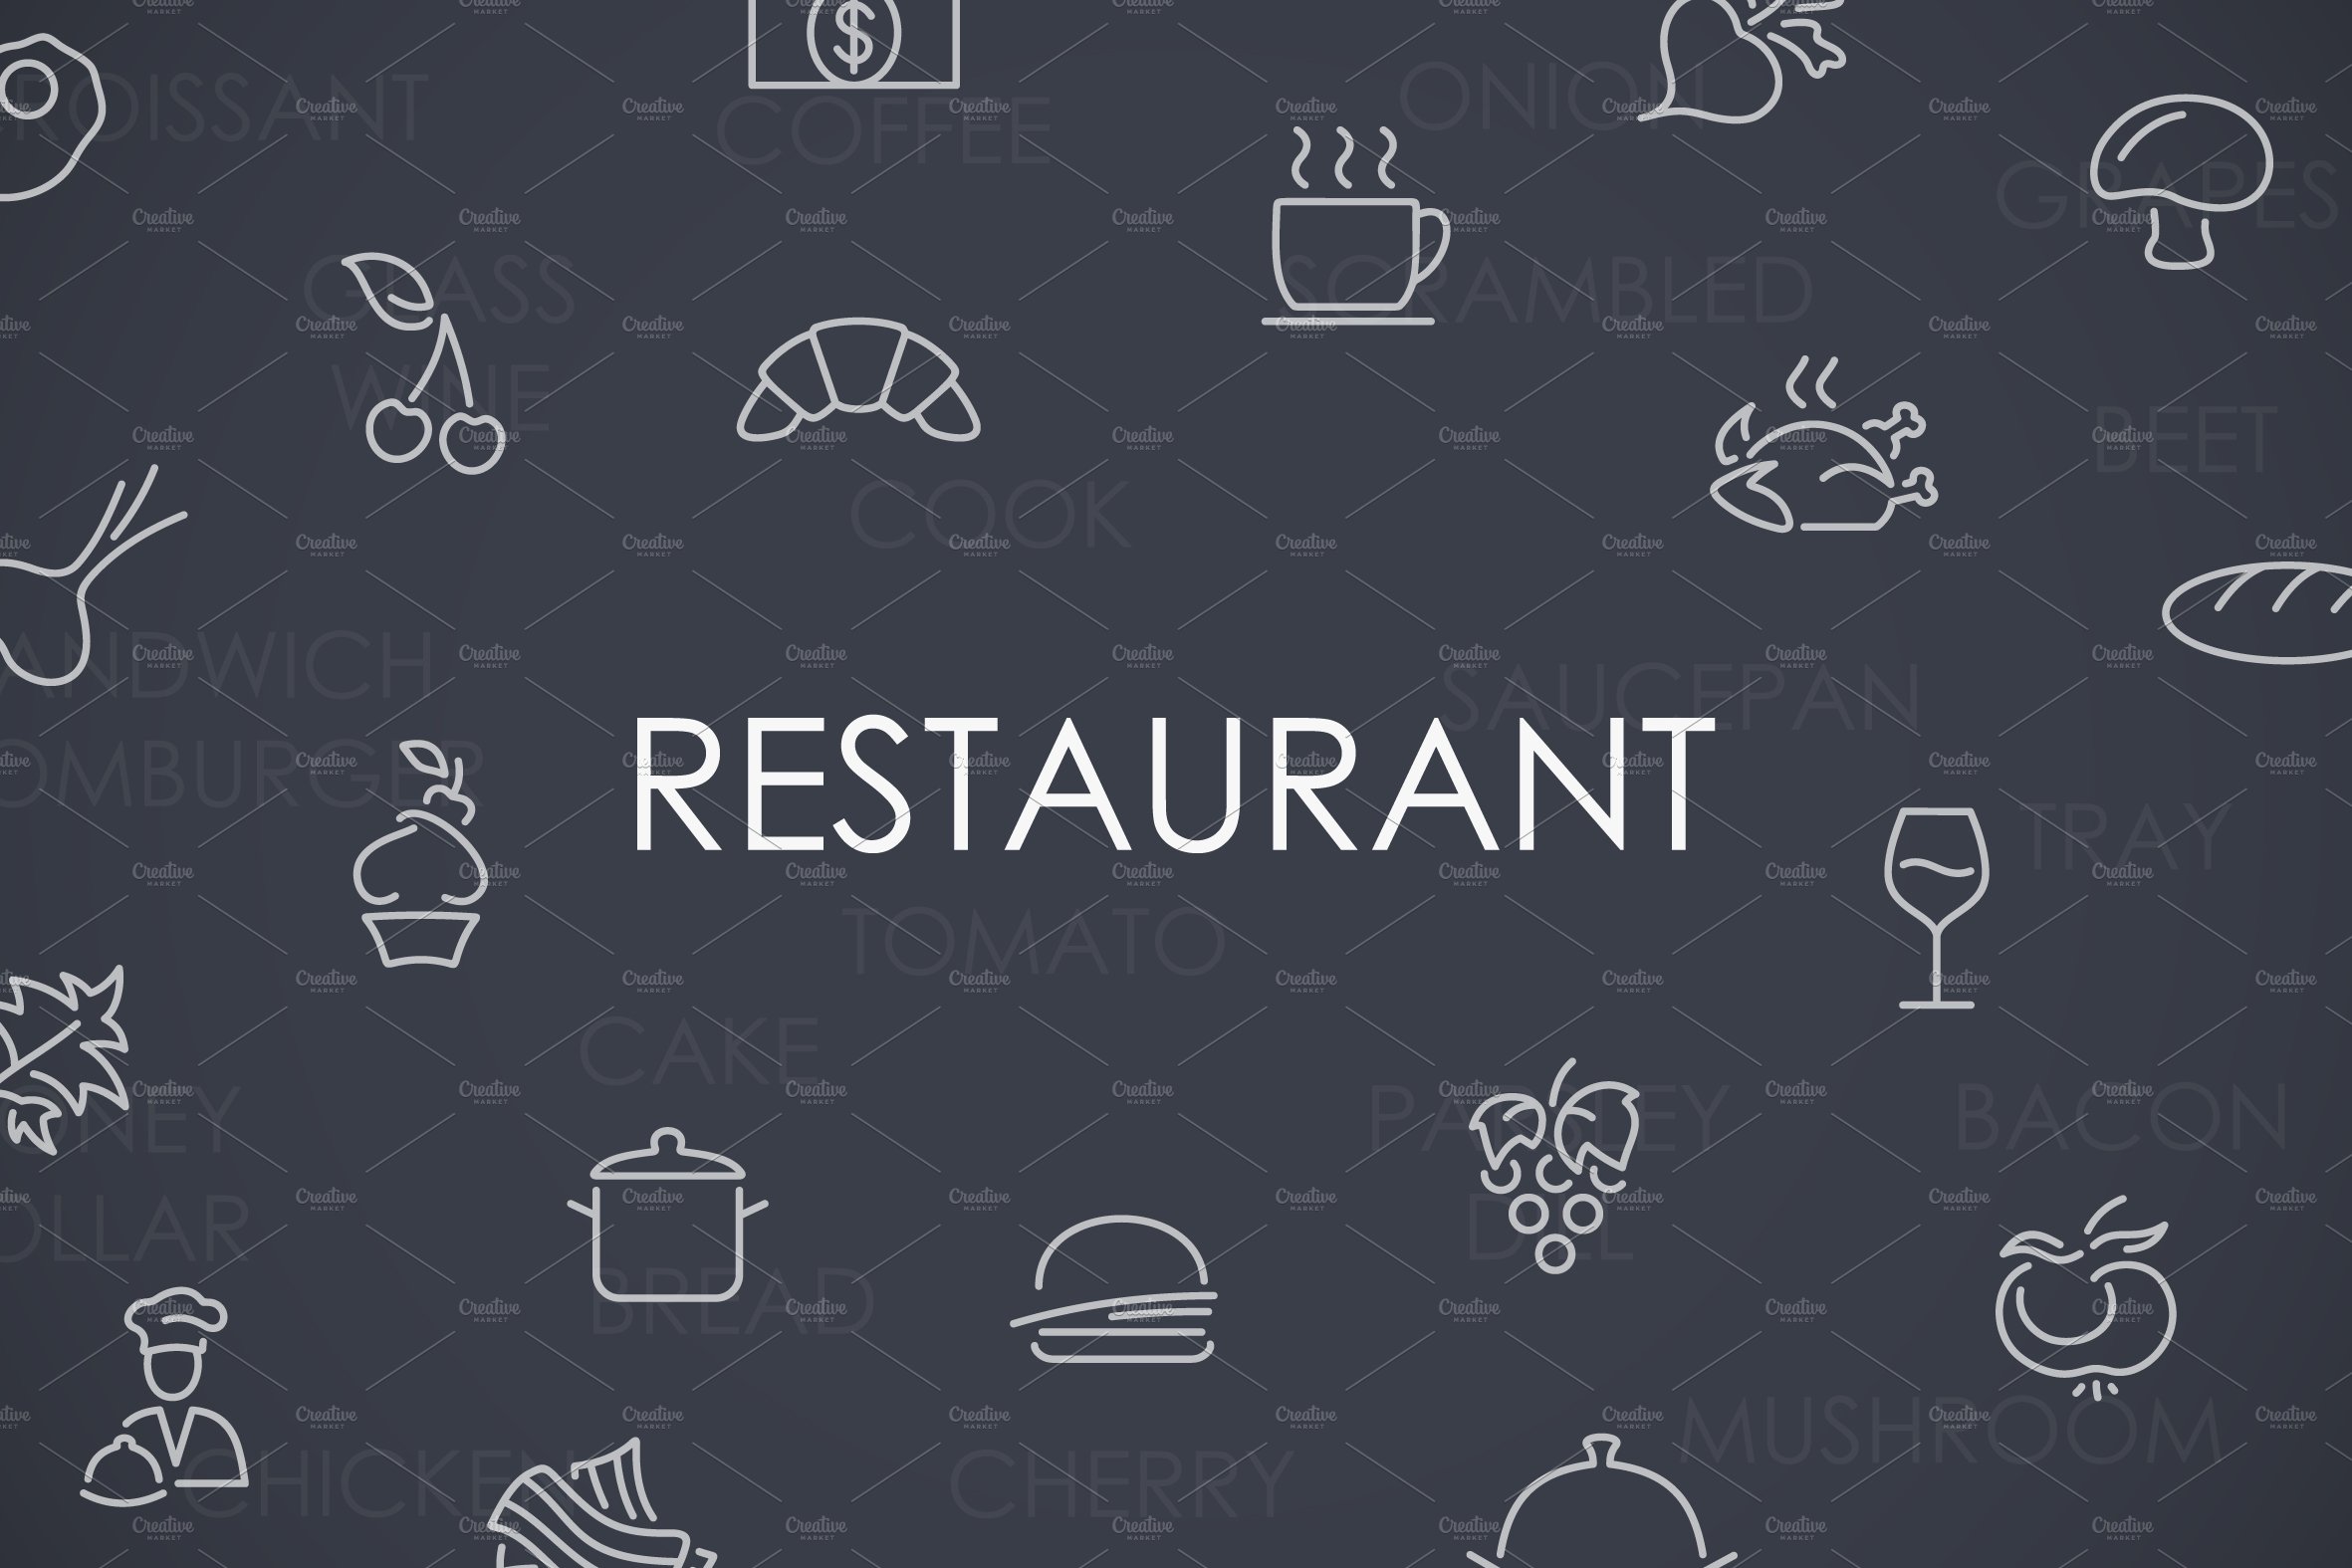 Restaurant thinline icons preview image.